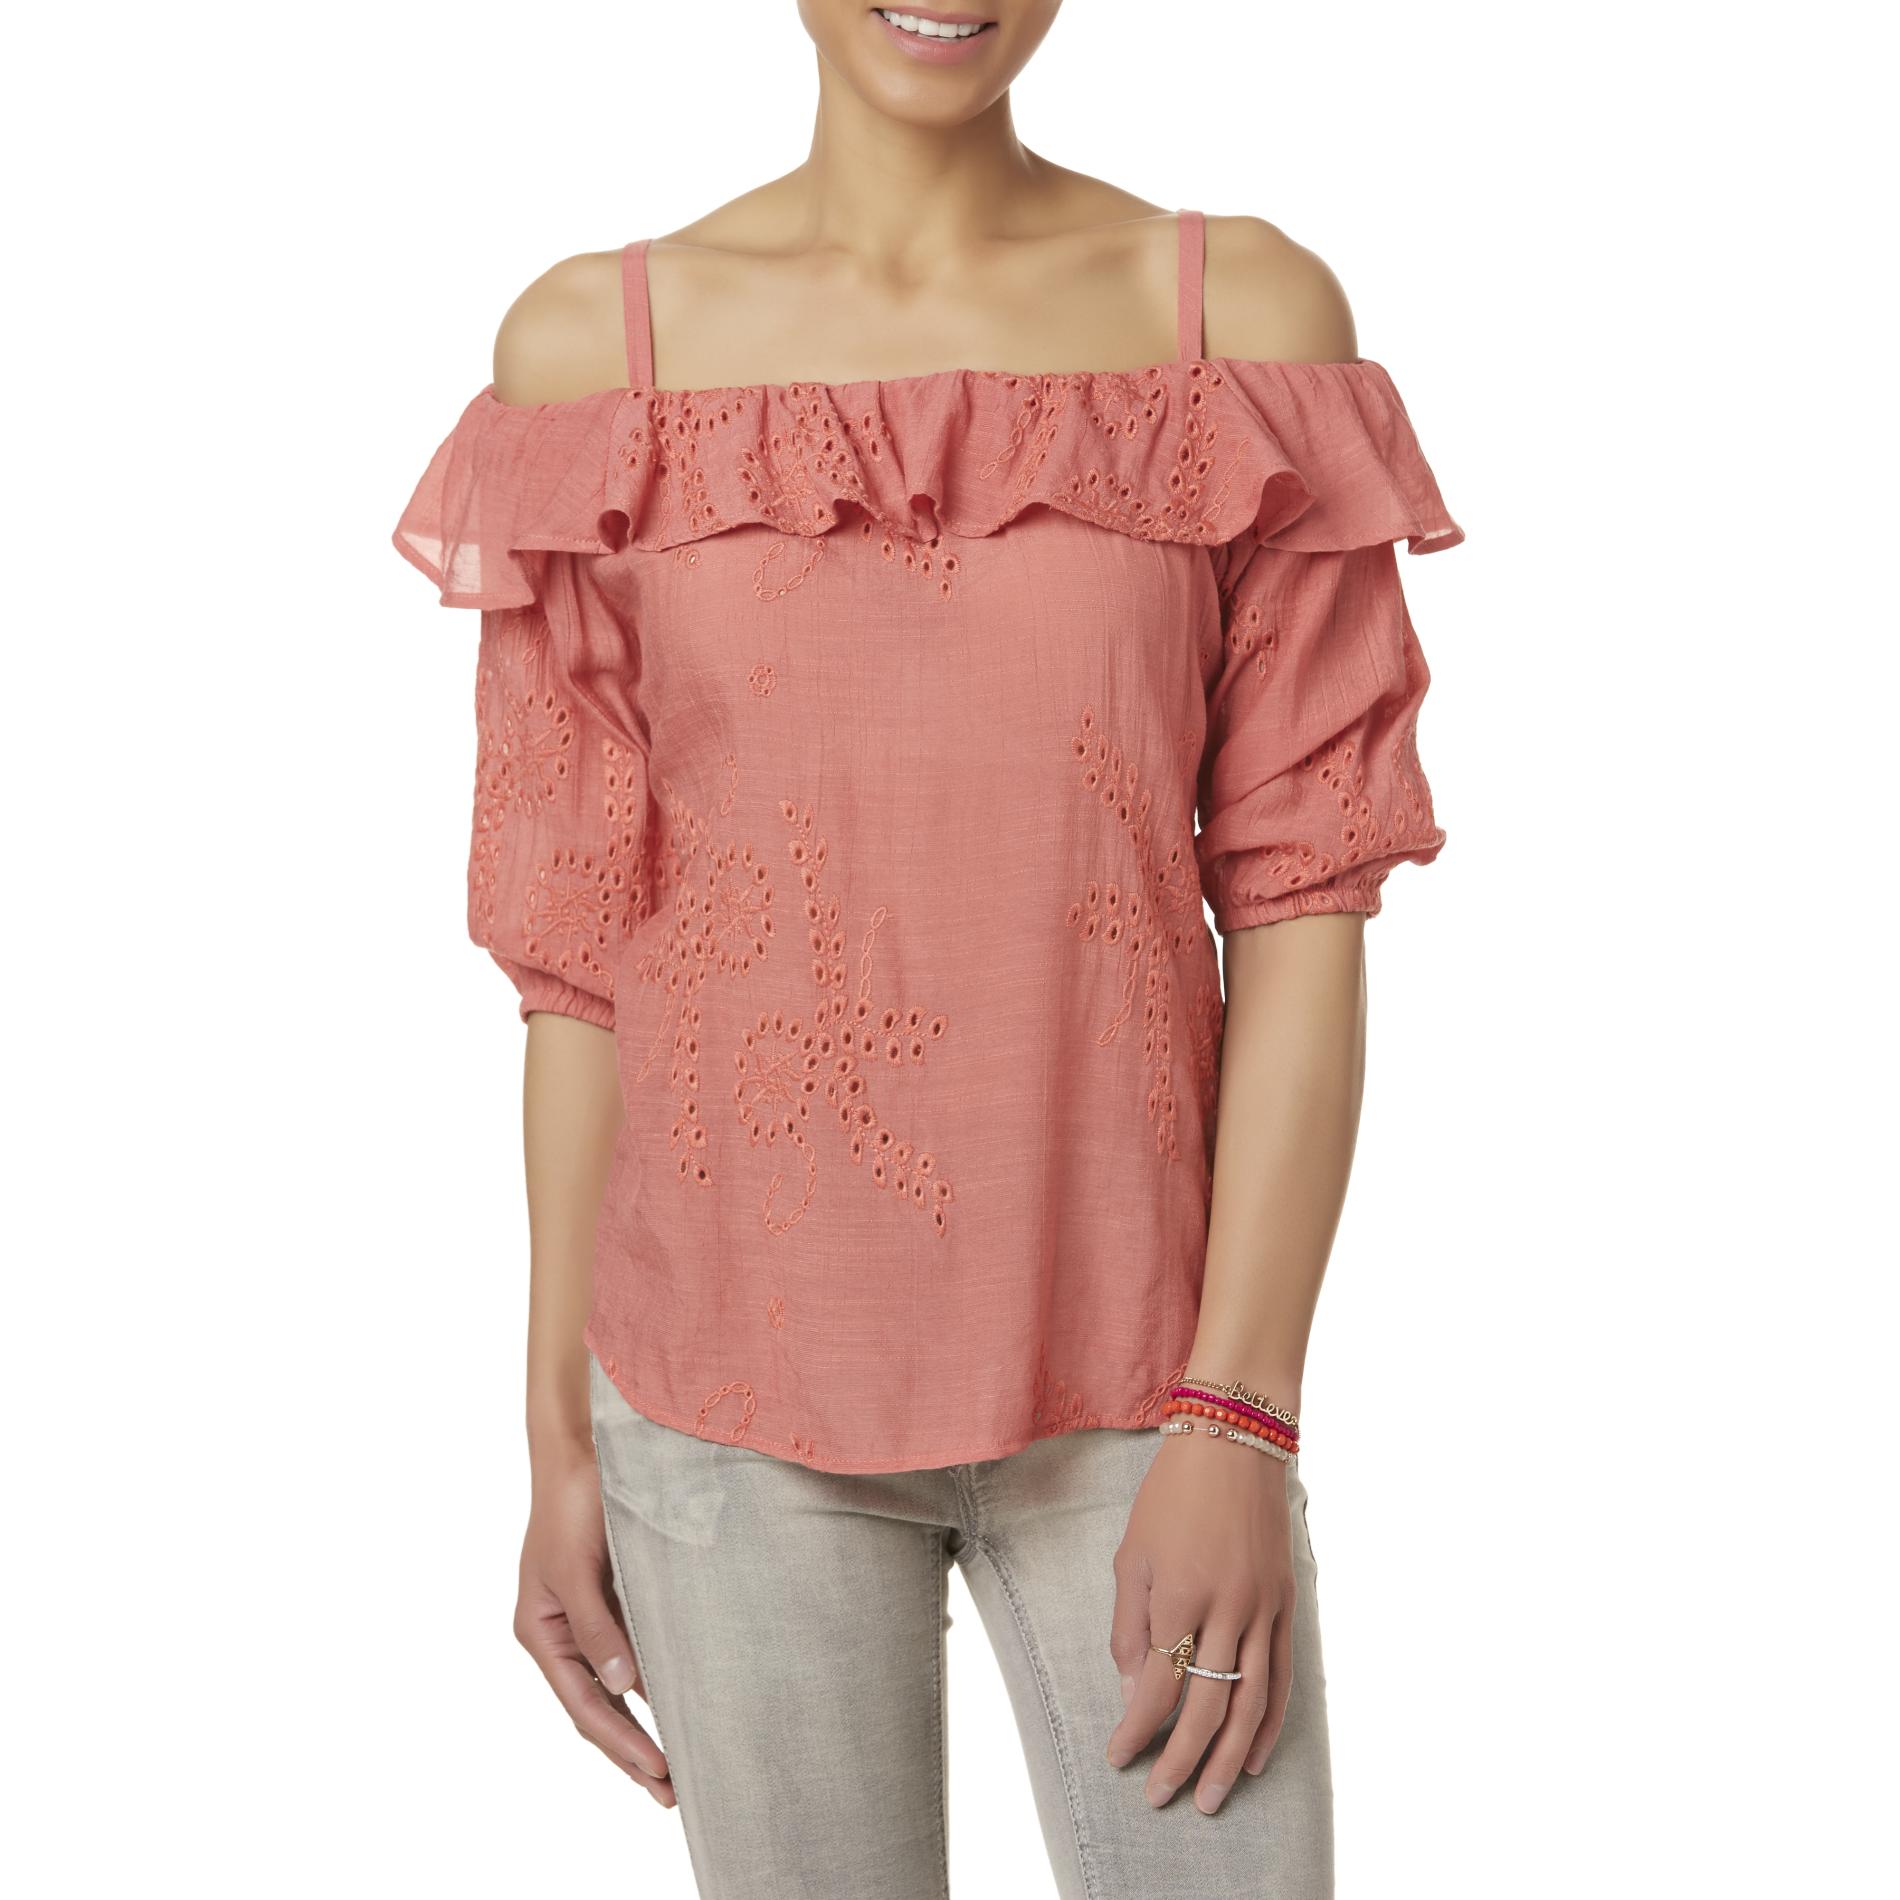 Simply Styled Women's Embroidered Cold Shoulder Top